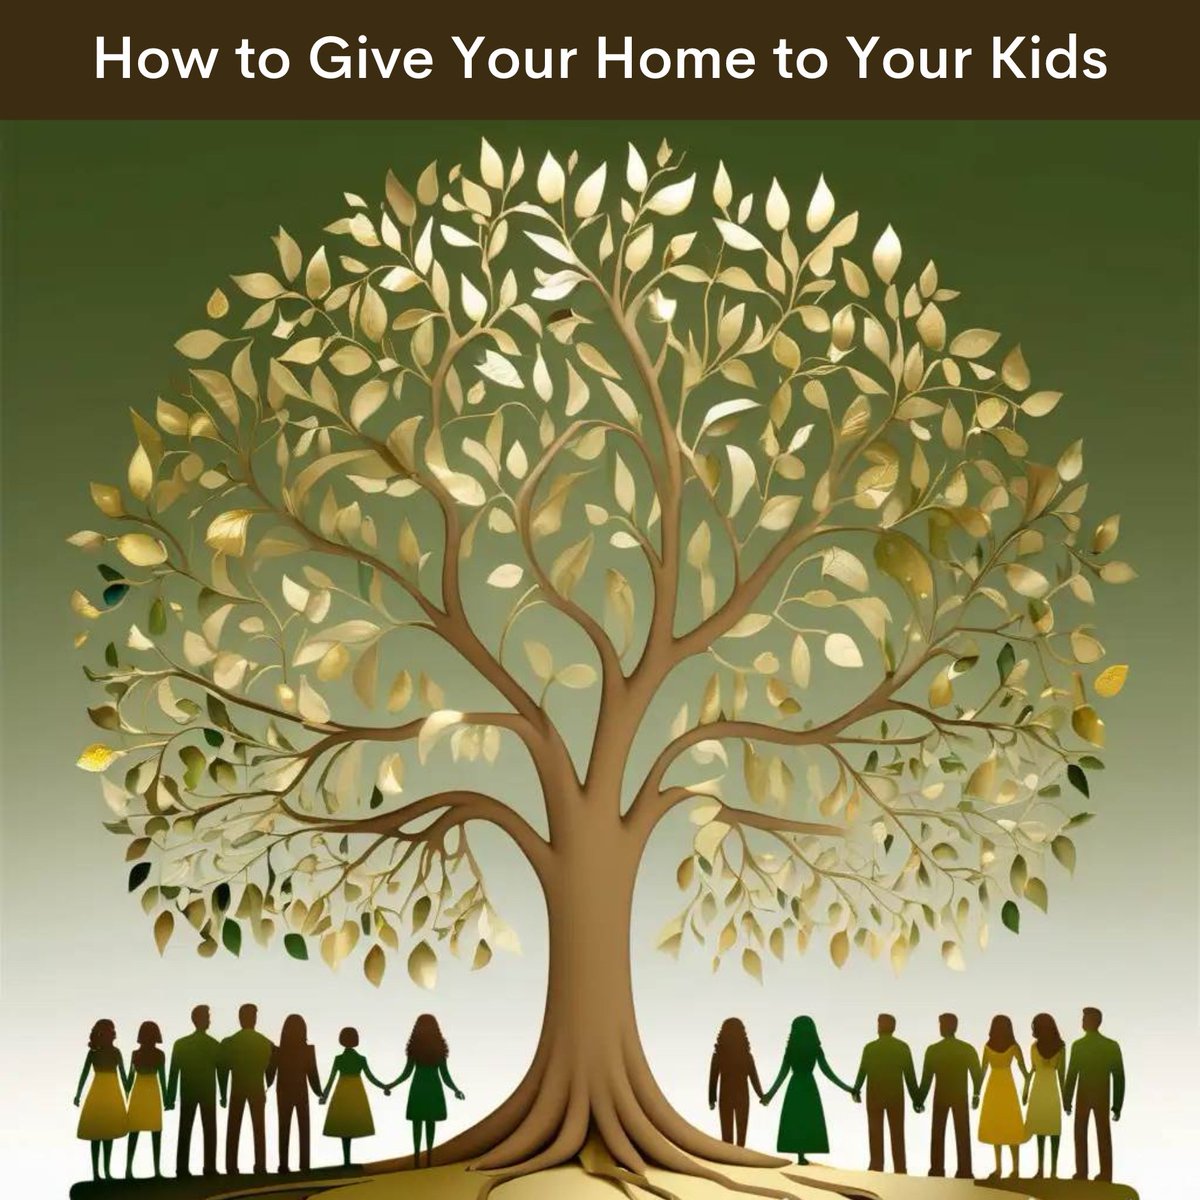 Want to Know How to Give Your Home to Your Kids?📷
Check out my newsletter to learn more:
mailchi.mp/3f3.../how-to-…
#newsletter #newslettersignup #shahairrealtor #shasellsrealestate #legacyplanning #legacy #familyhome #dfwrealtor #texasrealtor